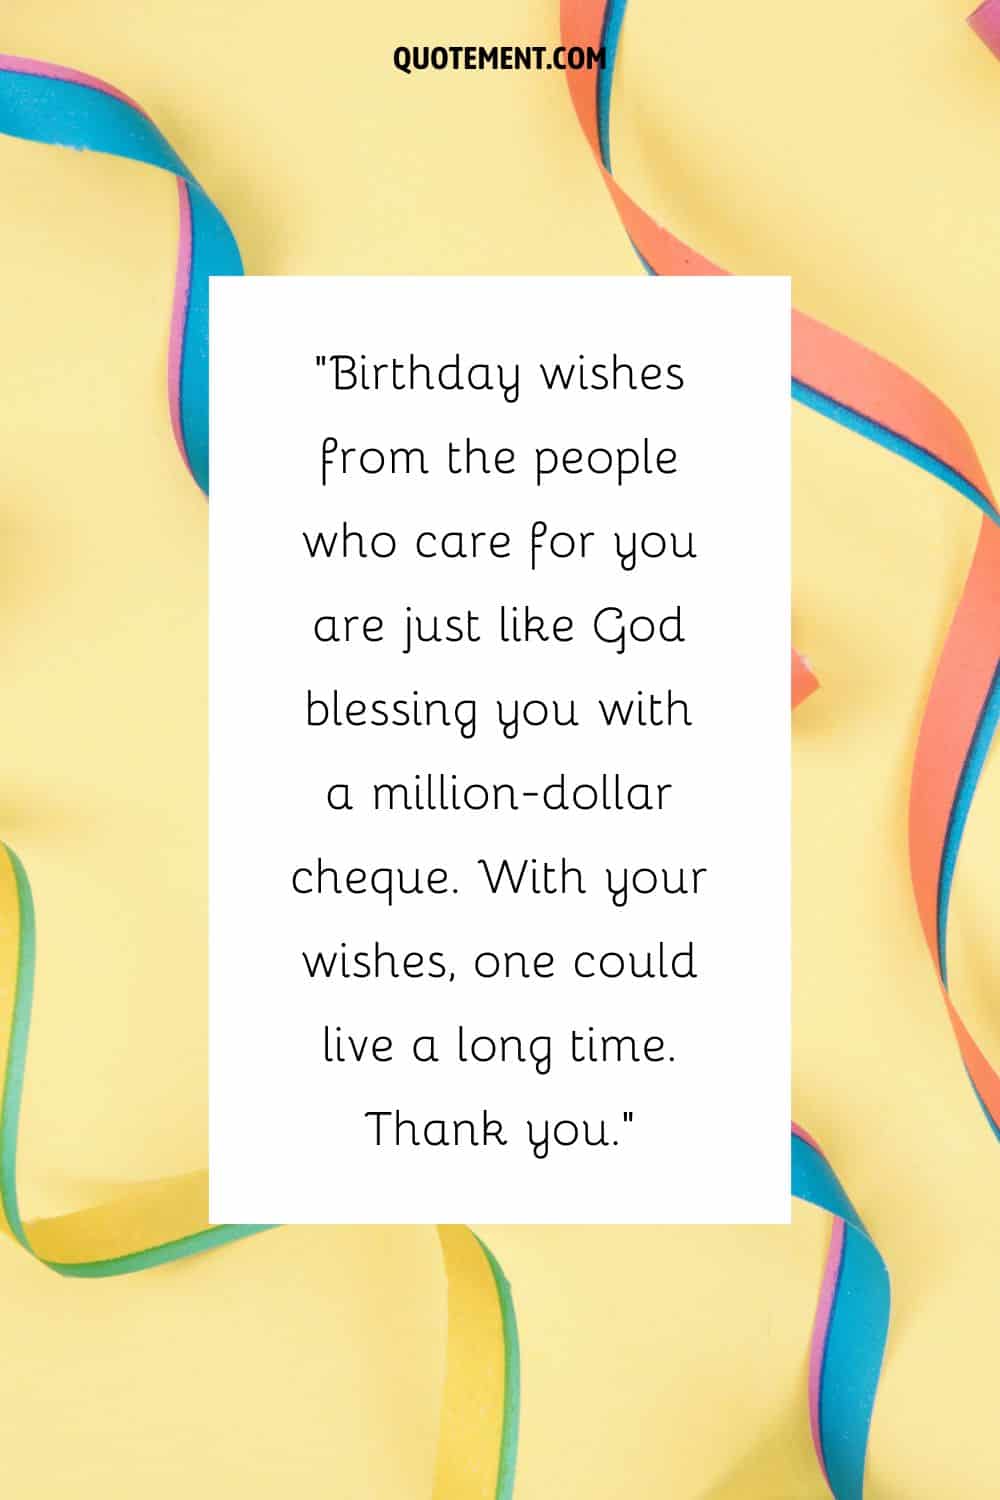 Birthday wishes from the people who care for you are just like God blessing you with a million-dollar cheque. With your wishes, one could live a long time. Thank you